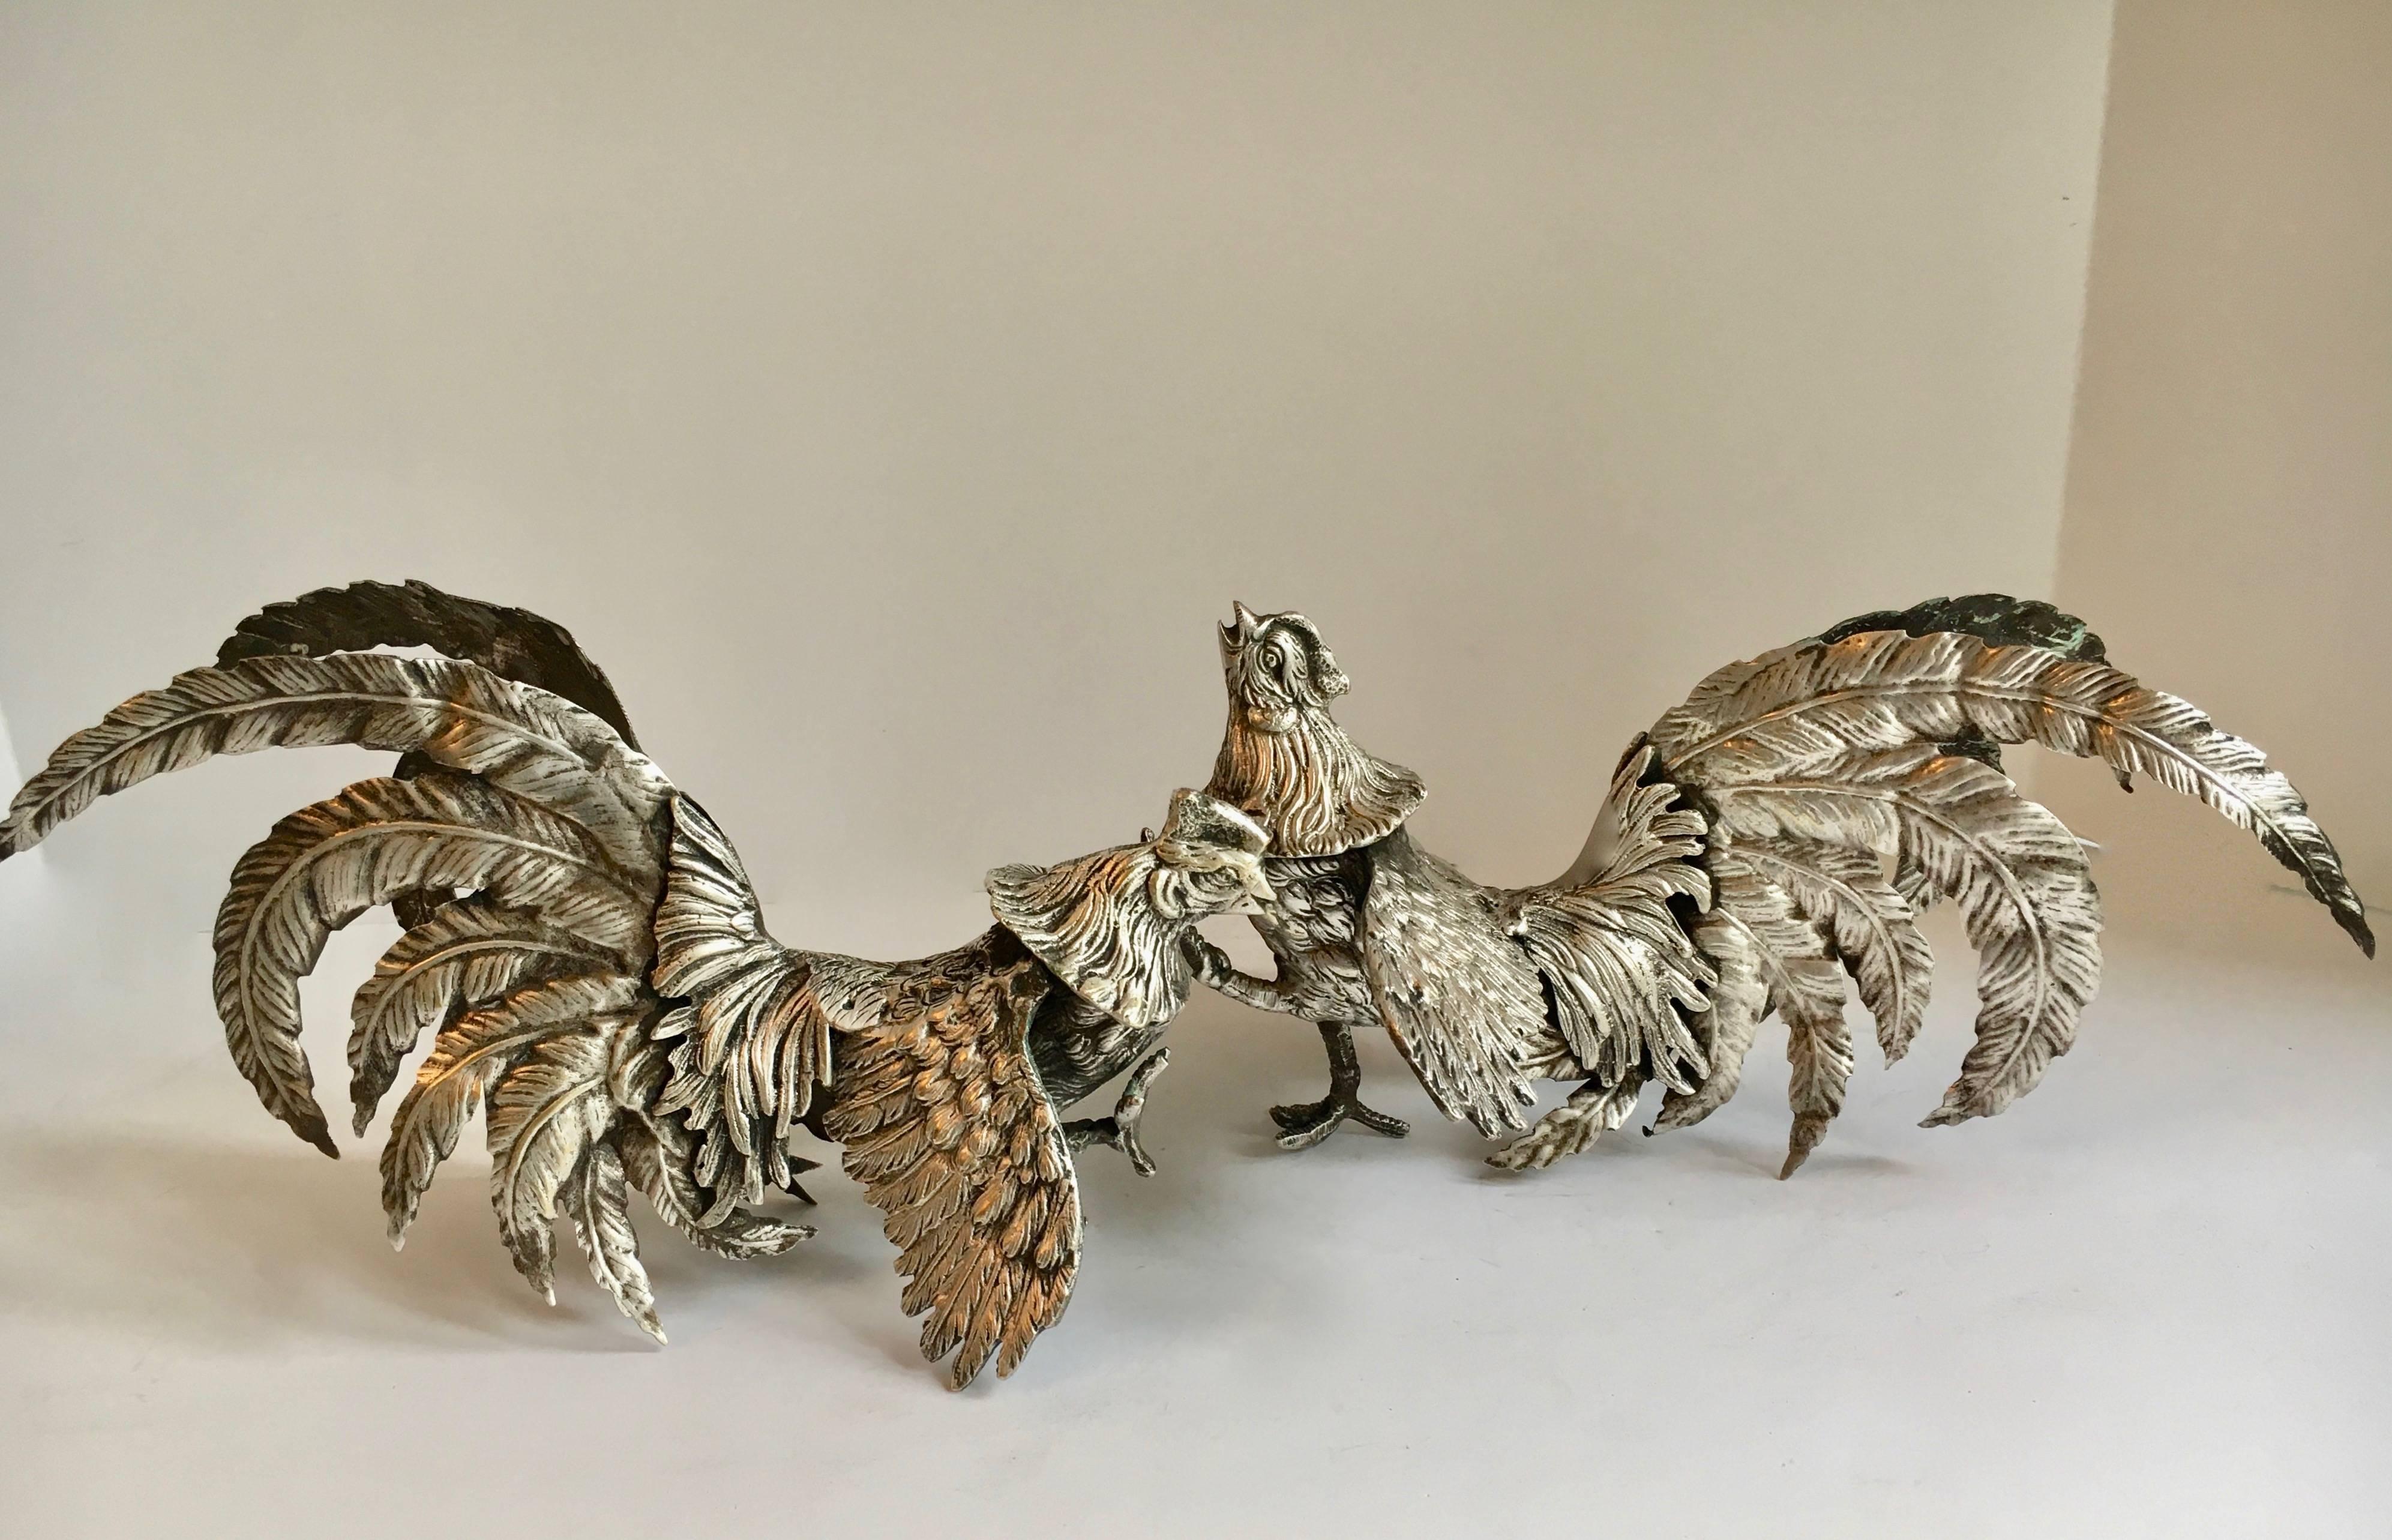 Pair of silver plate cockerels roosters bookends - a great vintage pair, also could be used as decoration or paper weights. Cute with the little rooster kicking his foot out!